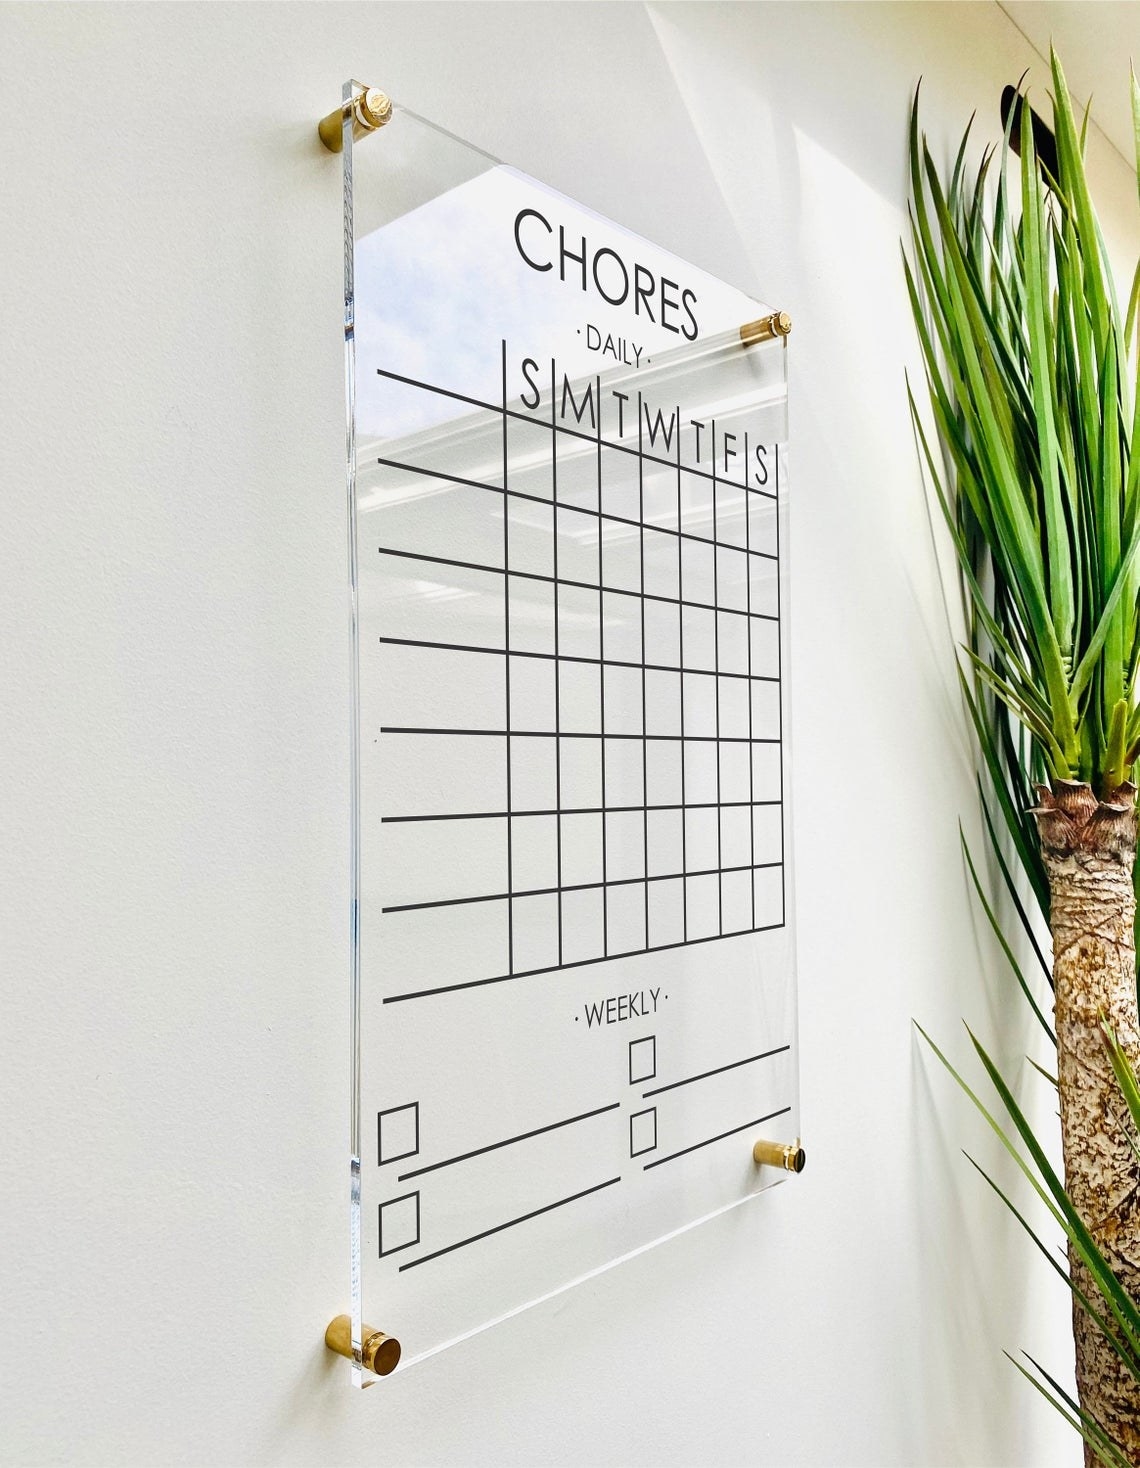 Clear acrylic chore chart mounted on wall with golden attachments on every corner. The chart has spots for daily and weekly chores. 